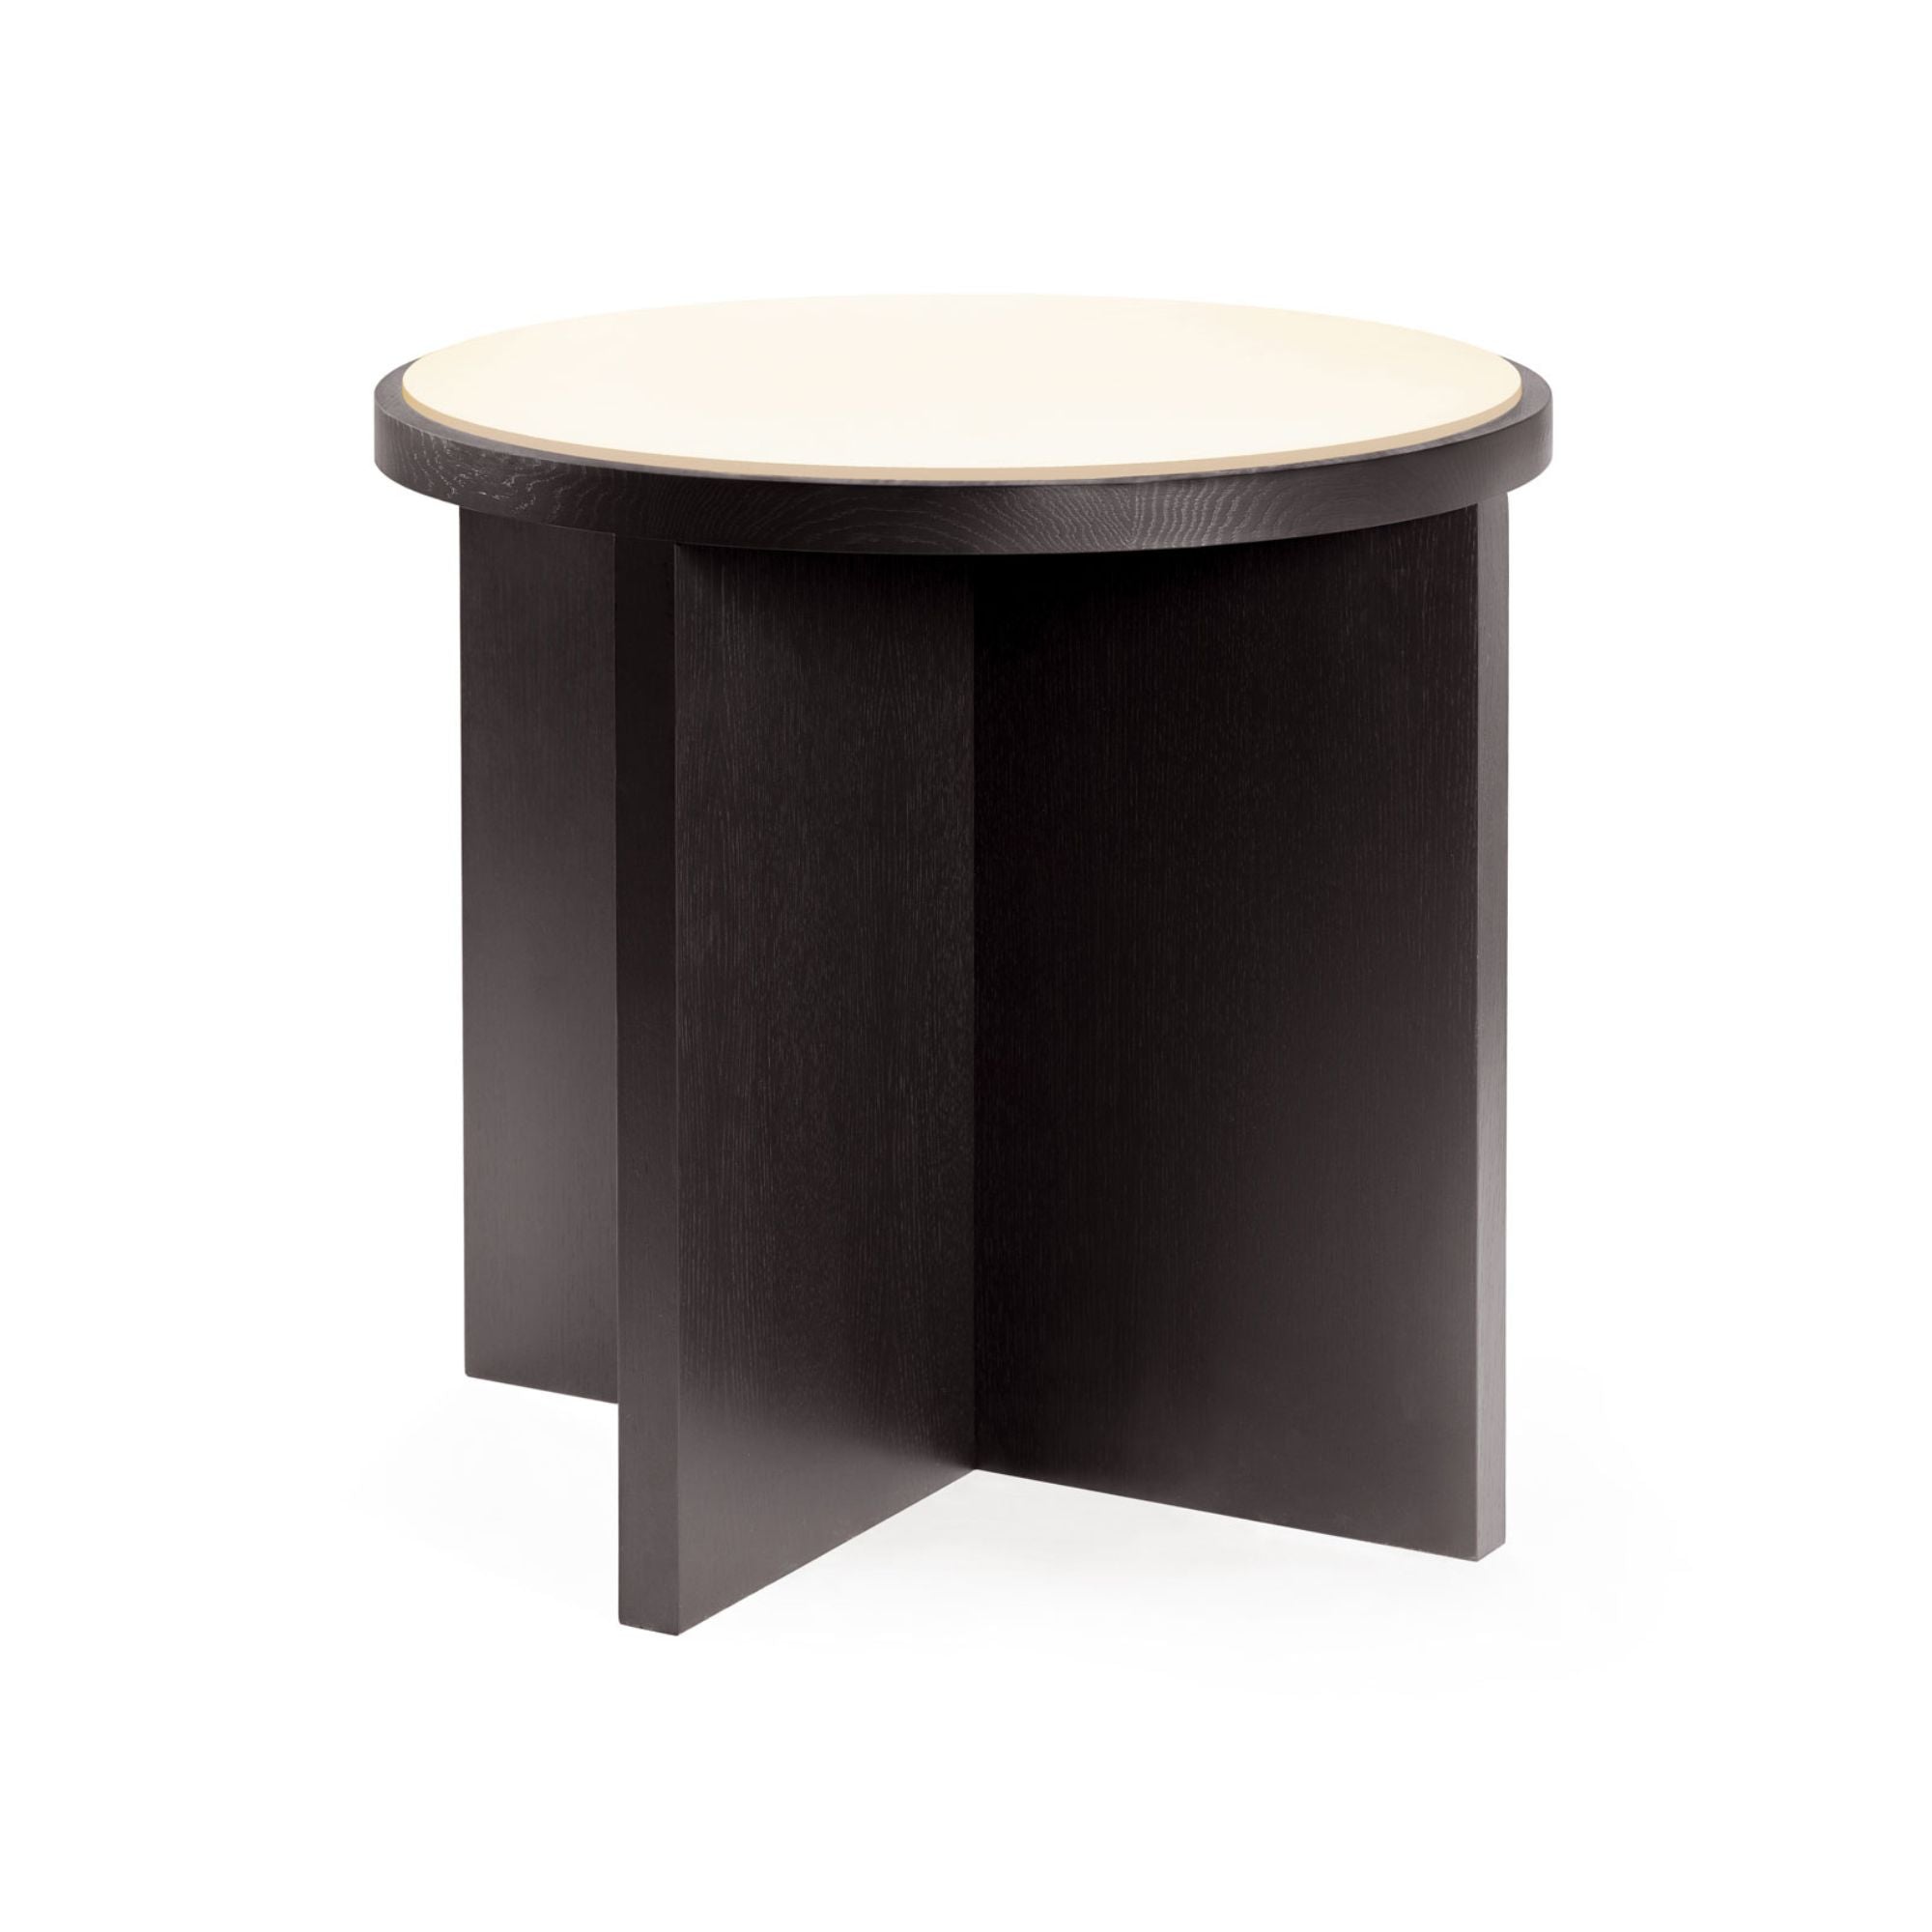 Cici S Dining Table